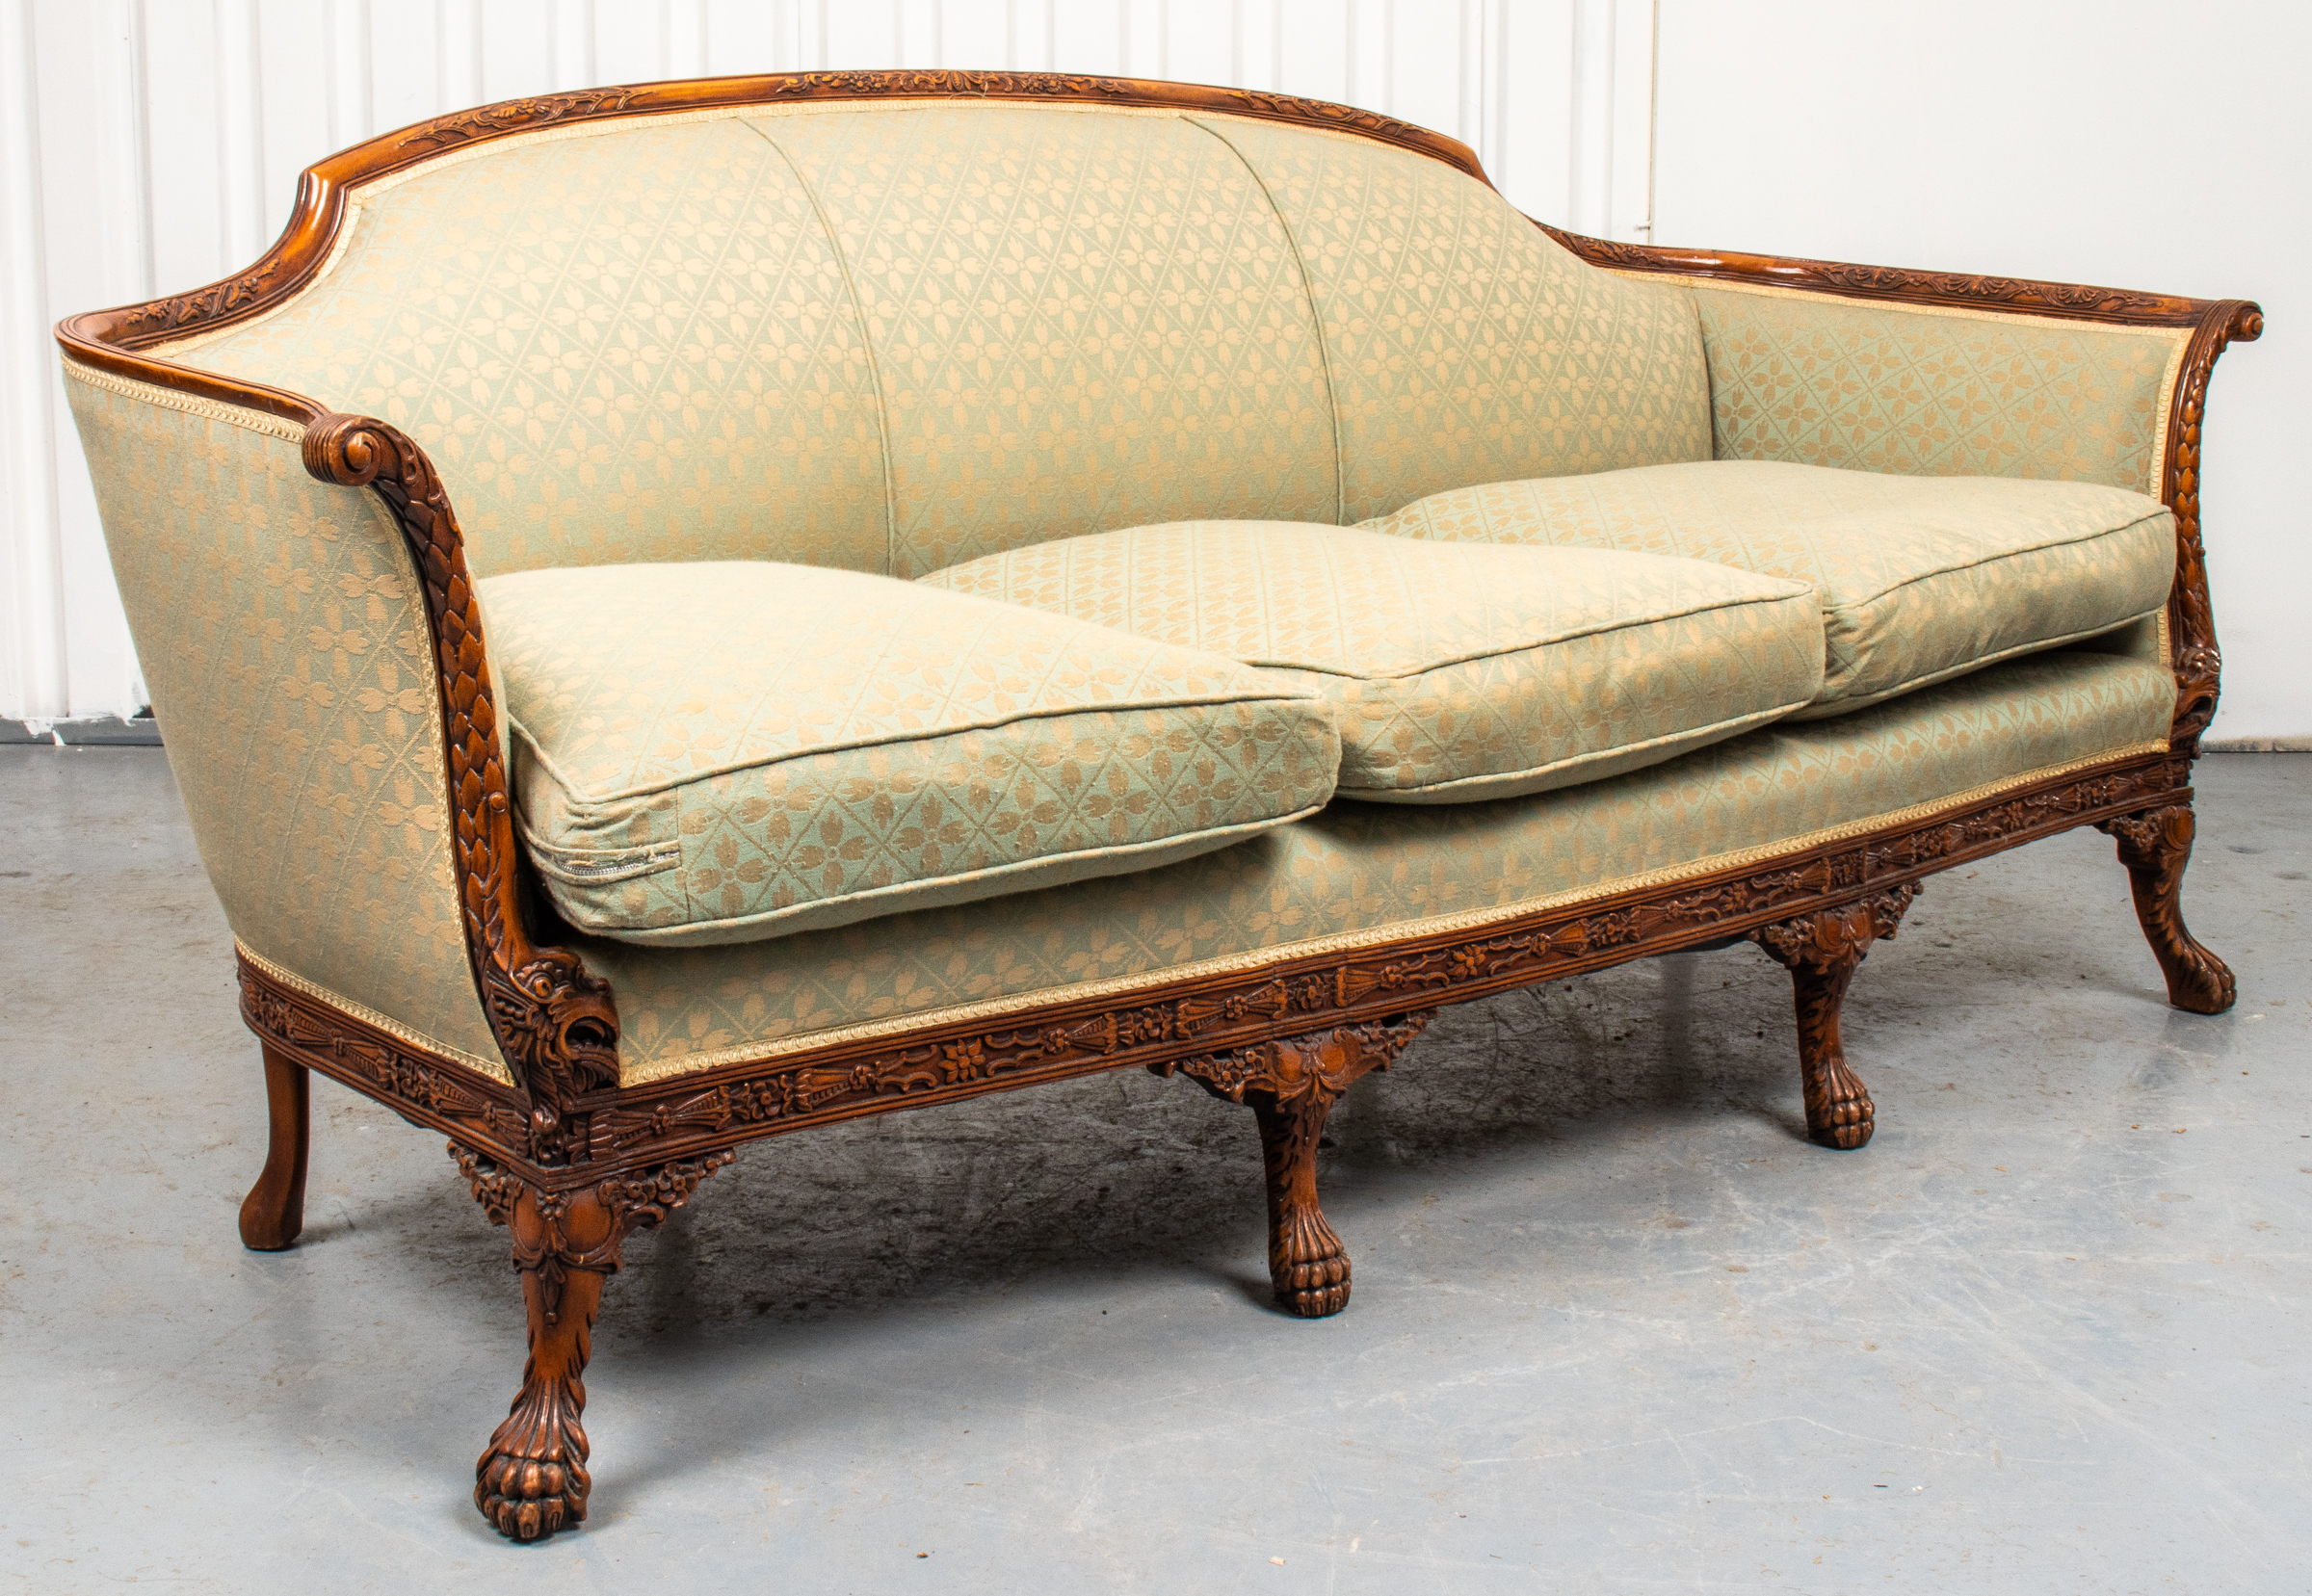 ROCOCO STYLE CARVED FRUITWOOD SOFA 3c3d3b